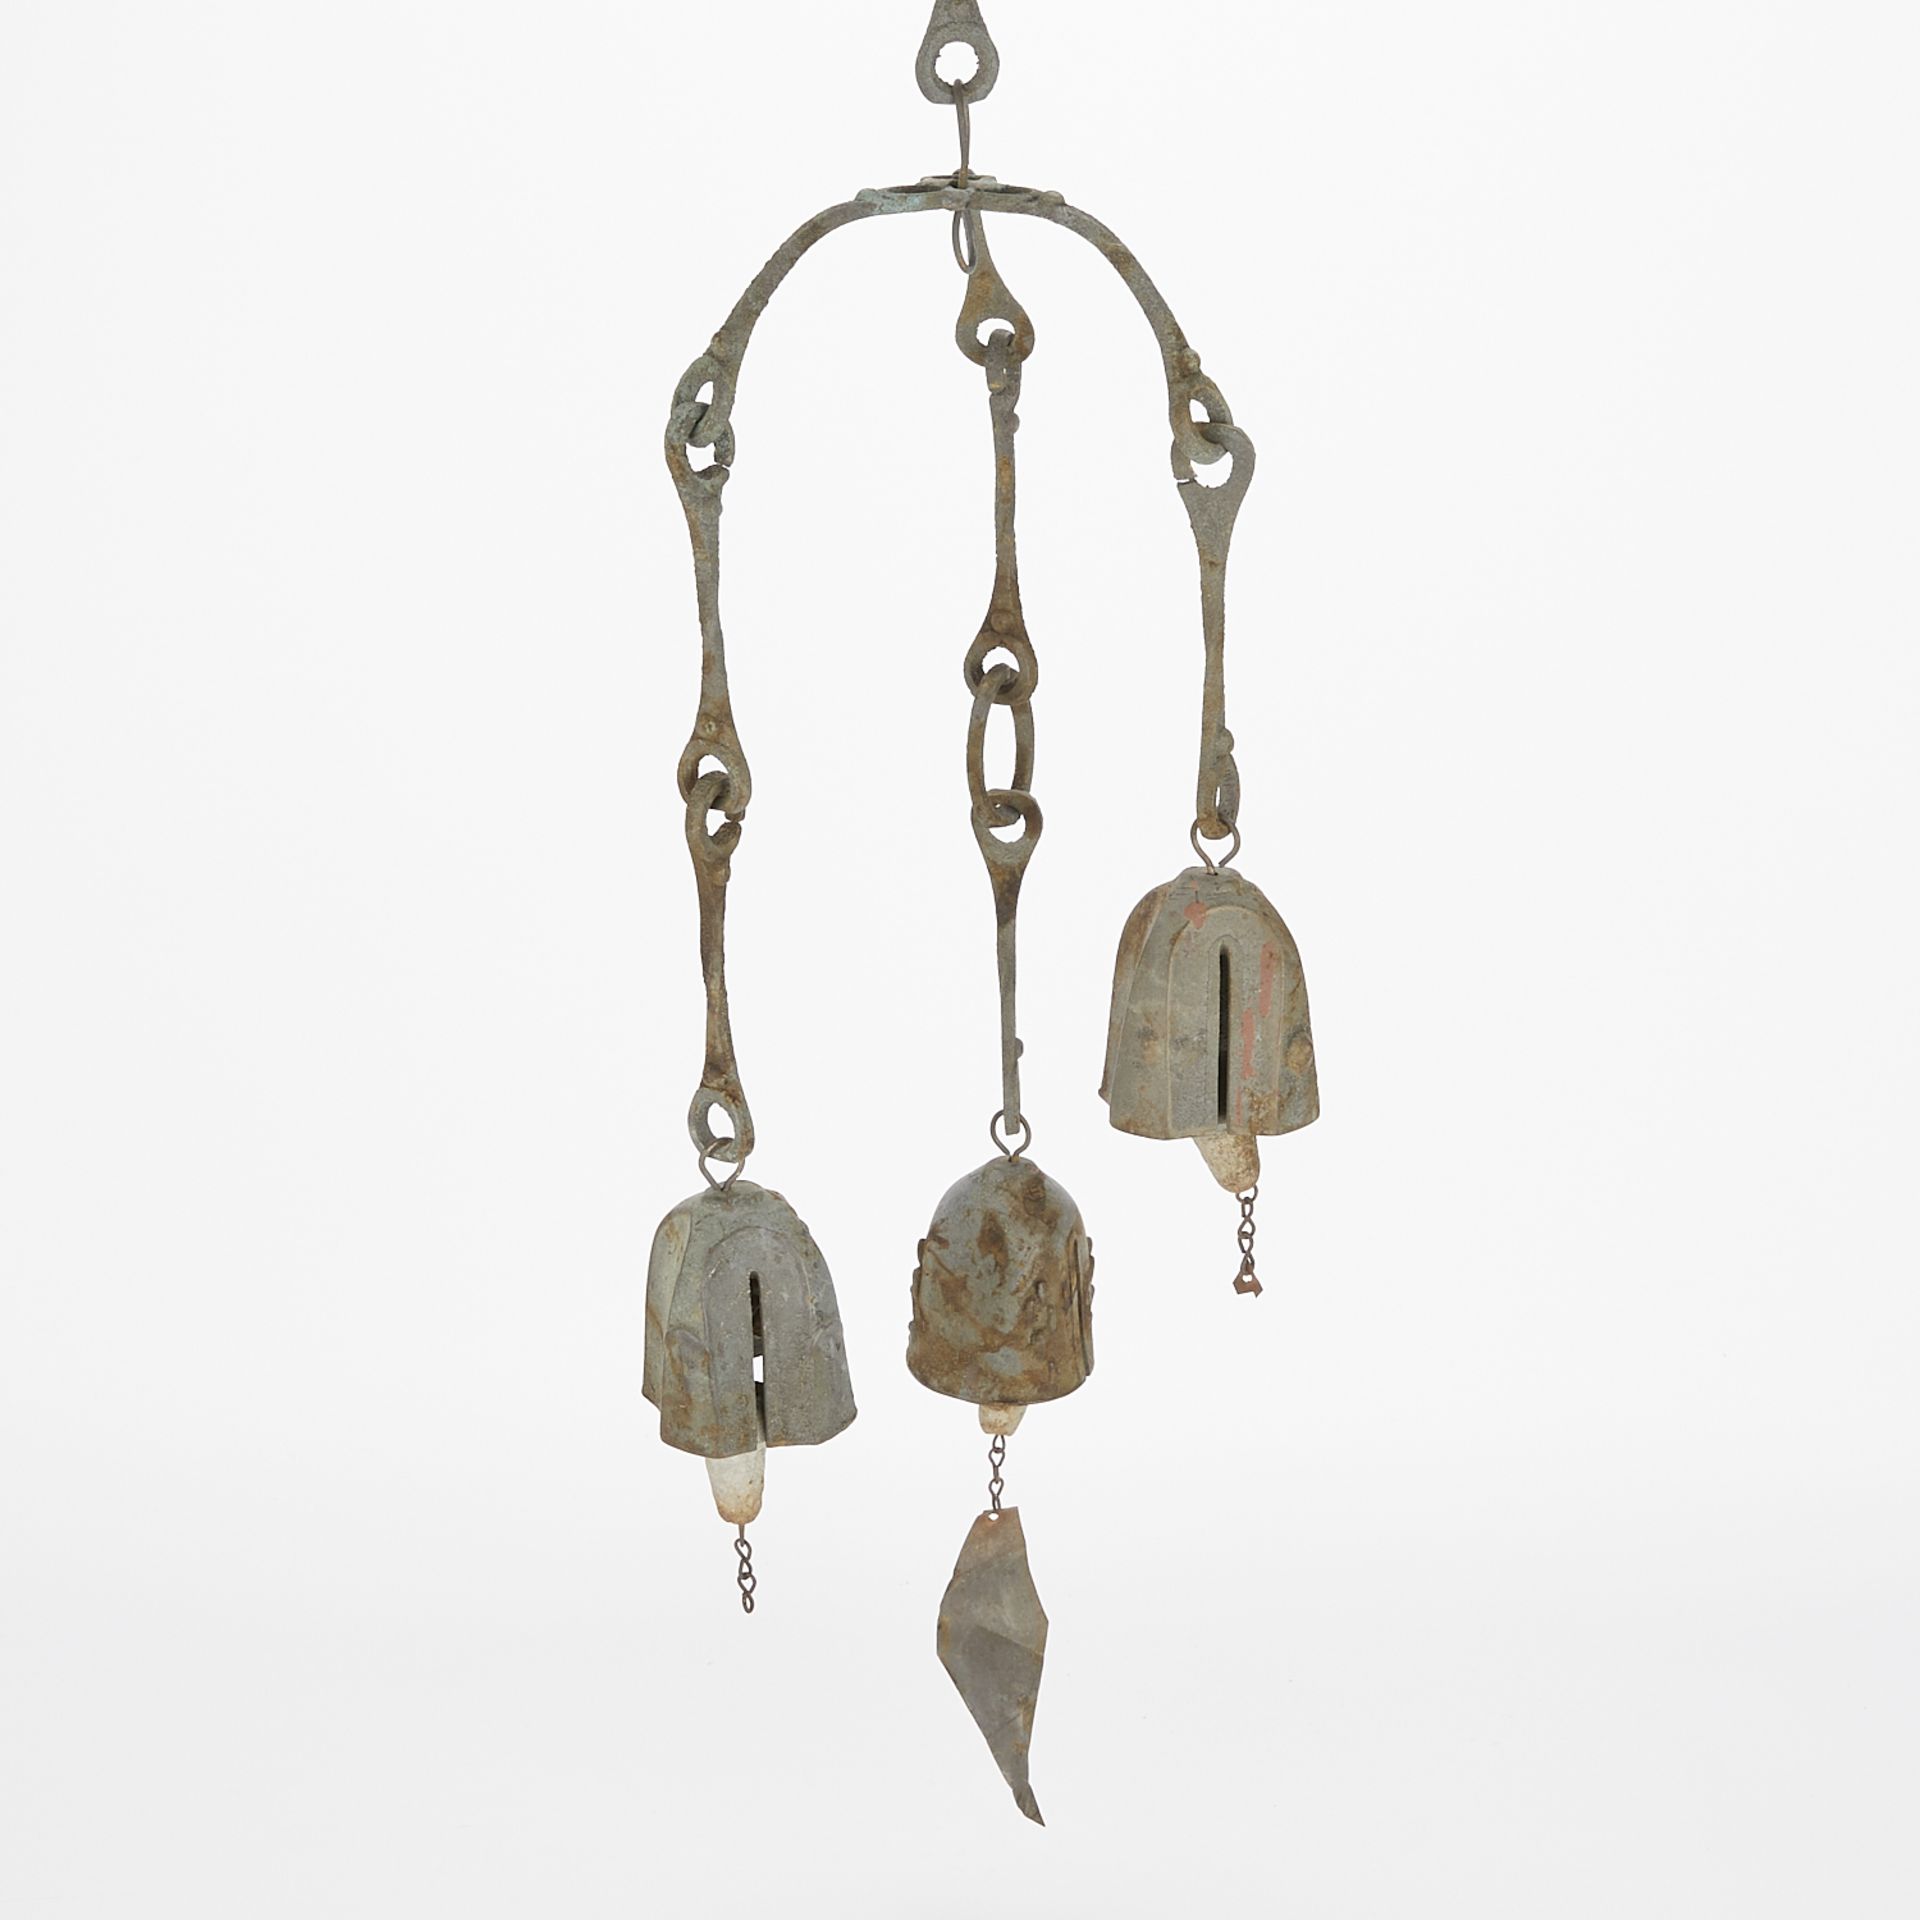 Paolo Soleri Tripod Cluster Bronze Wind Bell - Image 12 of 12